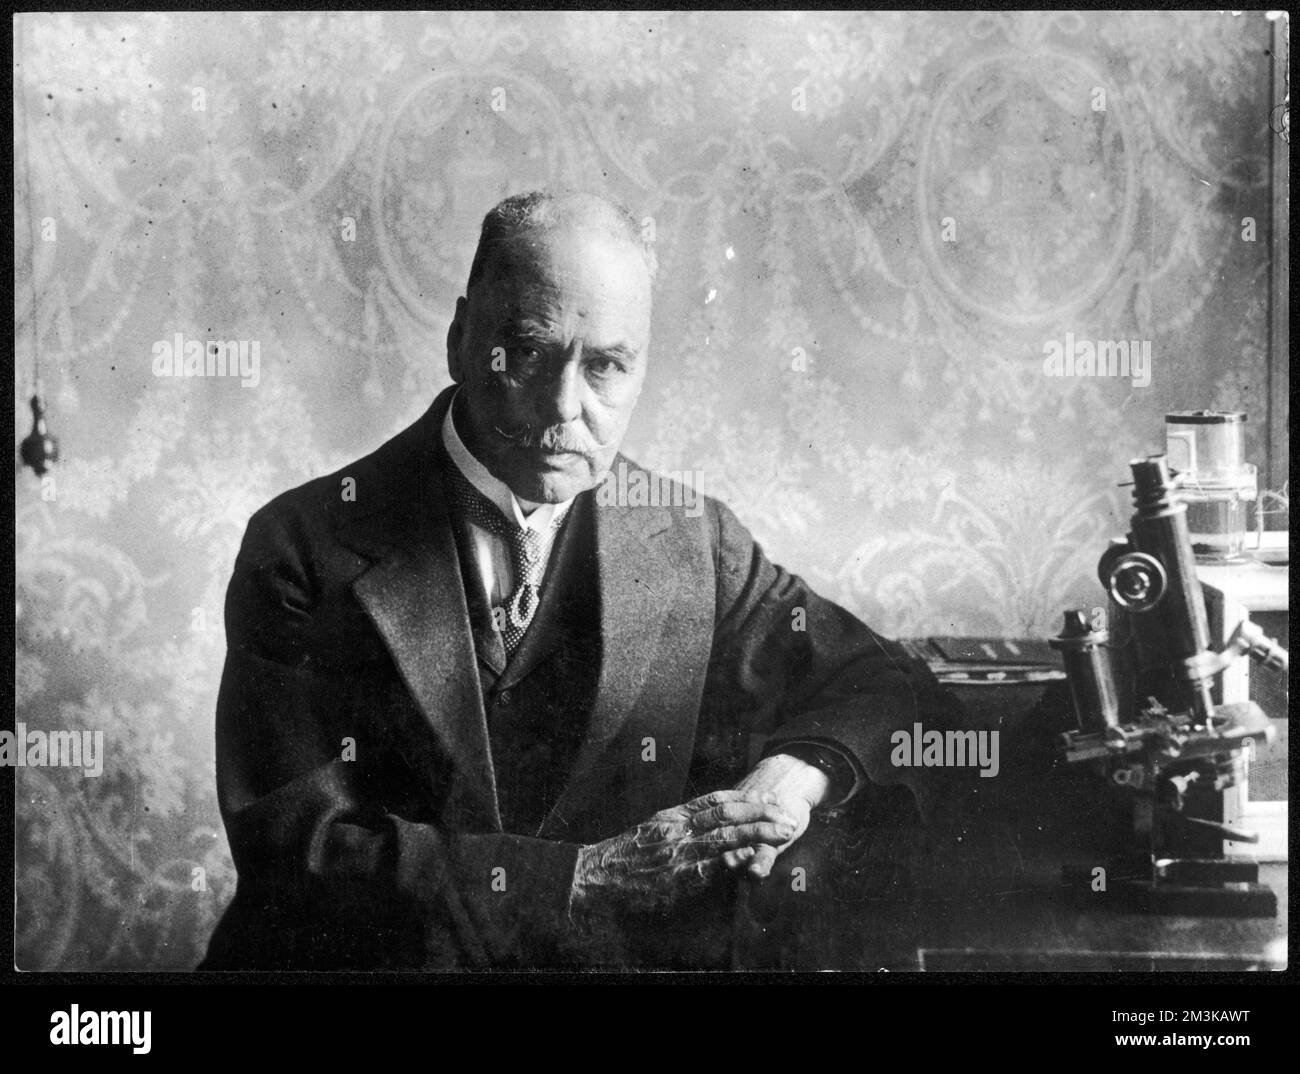 Sir Ronald Ross (1857 - 1932), British physician and Nobel Prize winner in 1902, who discovered the scientific link between mosquitoes and human malaria. In 1899 he became Professor of Tropical Medicine at the University of Liverpool. He travelled the world advising on malarial control.     Date: c. 1920 Stock Photo